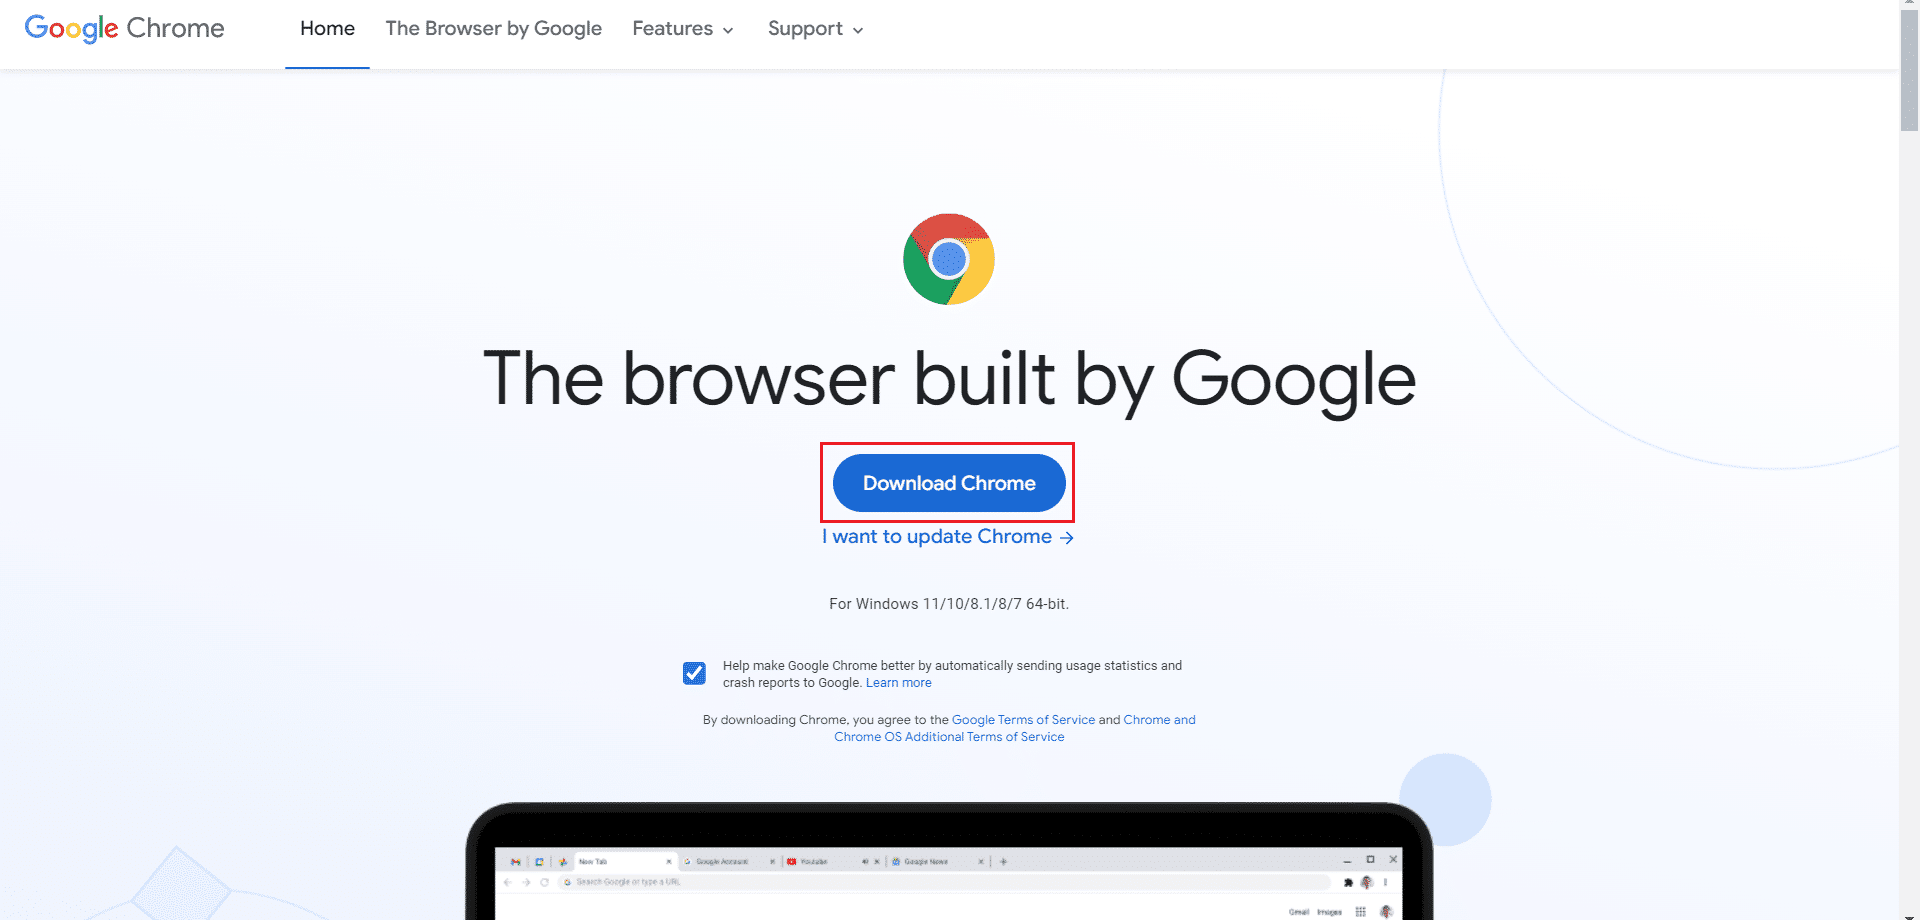 Click on the Download Chrome button